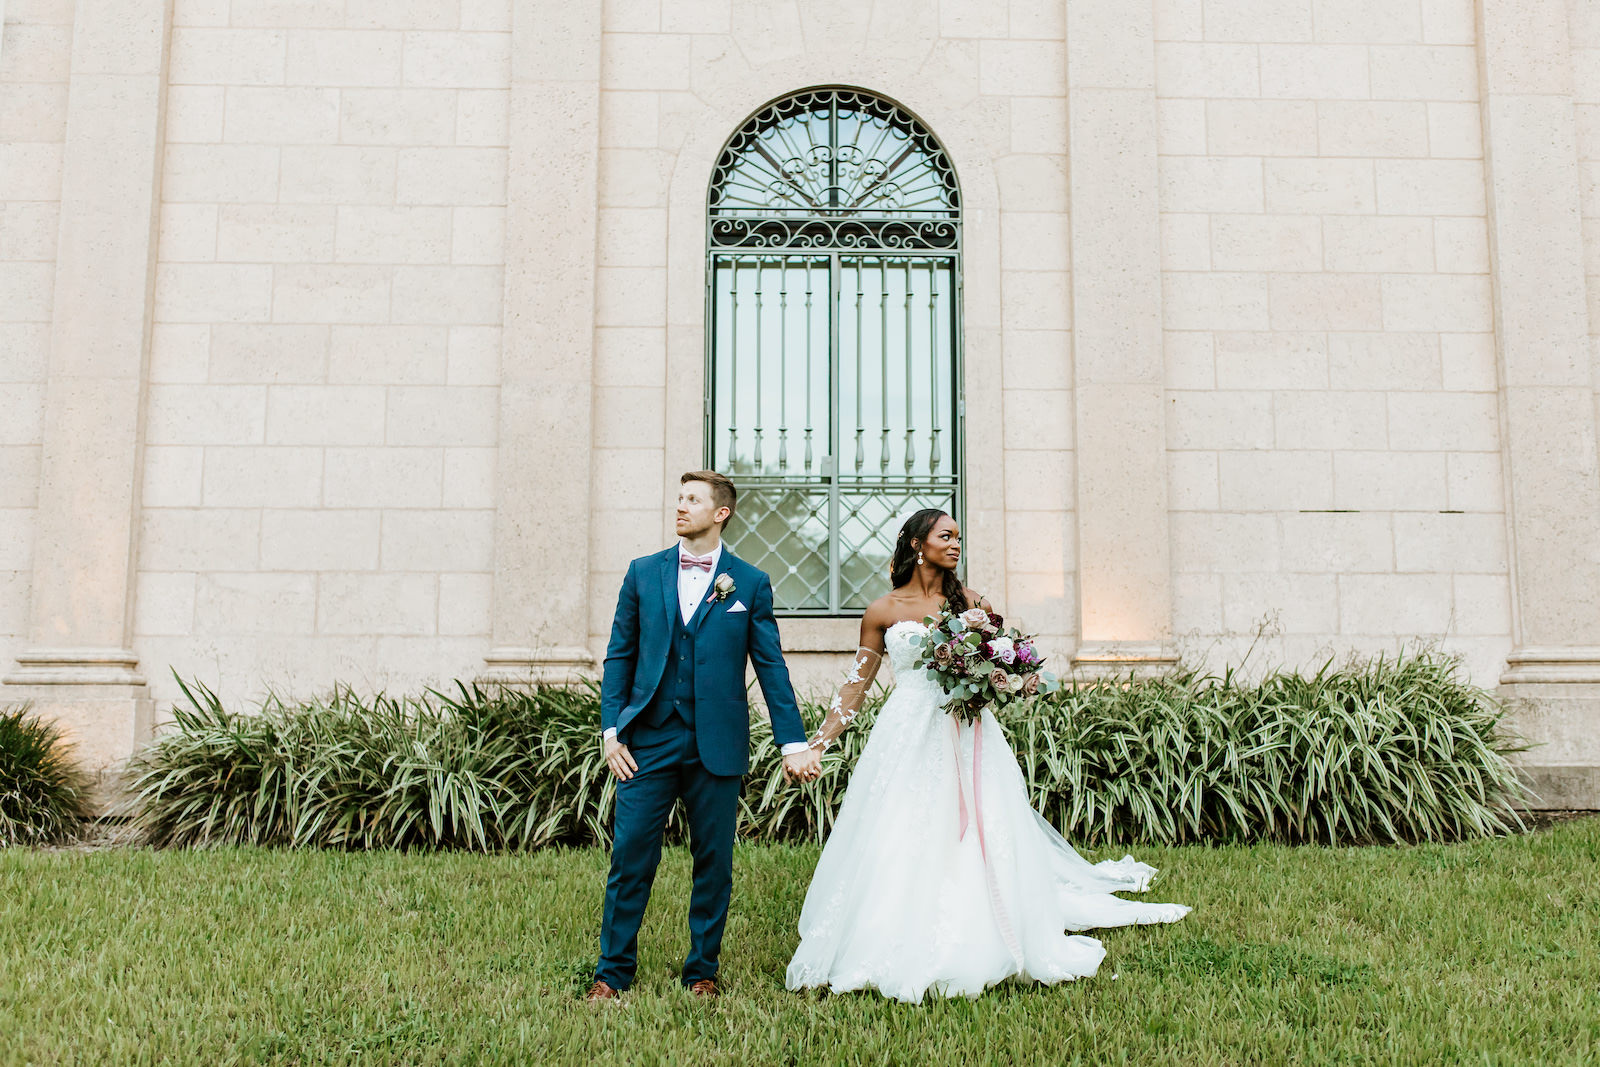 Bride and Groom Outdoor Portrait in Downtown St. Pete | Lace and Tulle Ballgown Bridal Gown Wedding Dress with Illusion Lace Long Sleeves | Navy Groom Suit | Bridal Bouquet with Ivory Pink and Burgundy Maroon Roses with Eucalyptus Greenery and Cascading Pink Velvet Ribbons